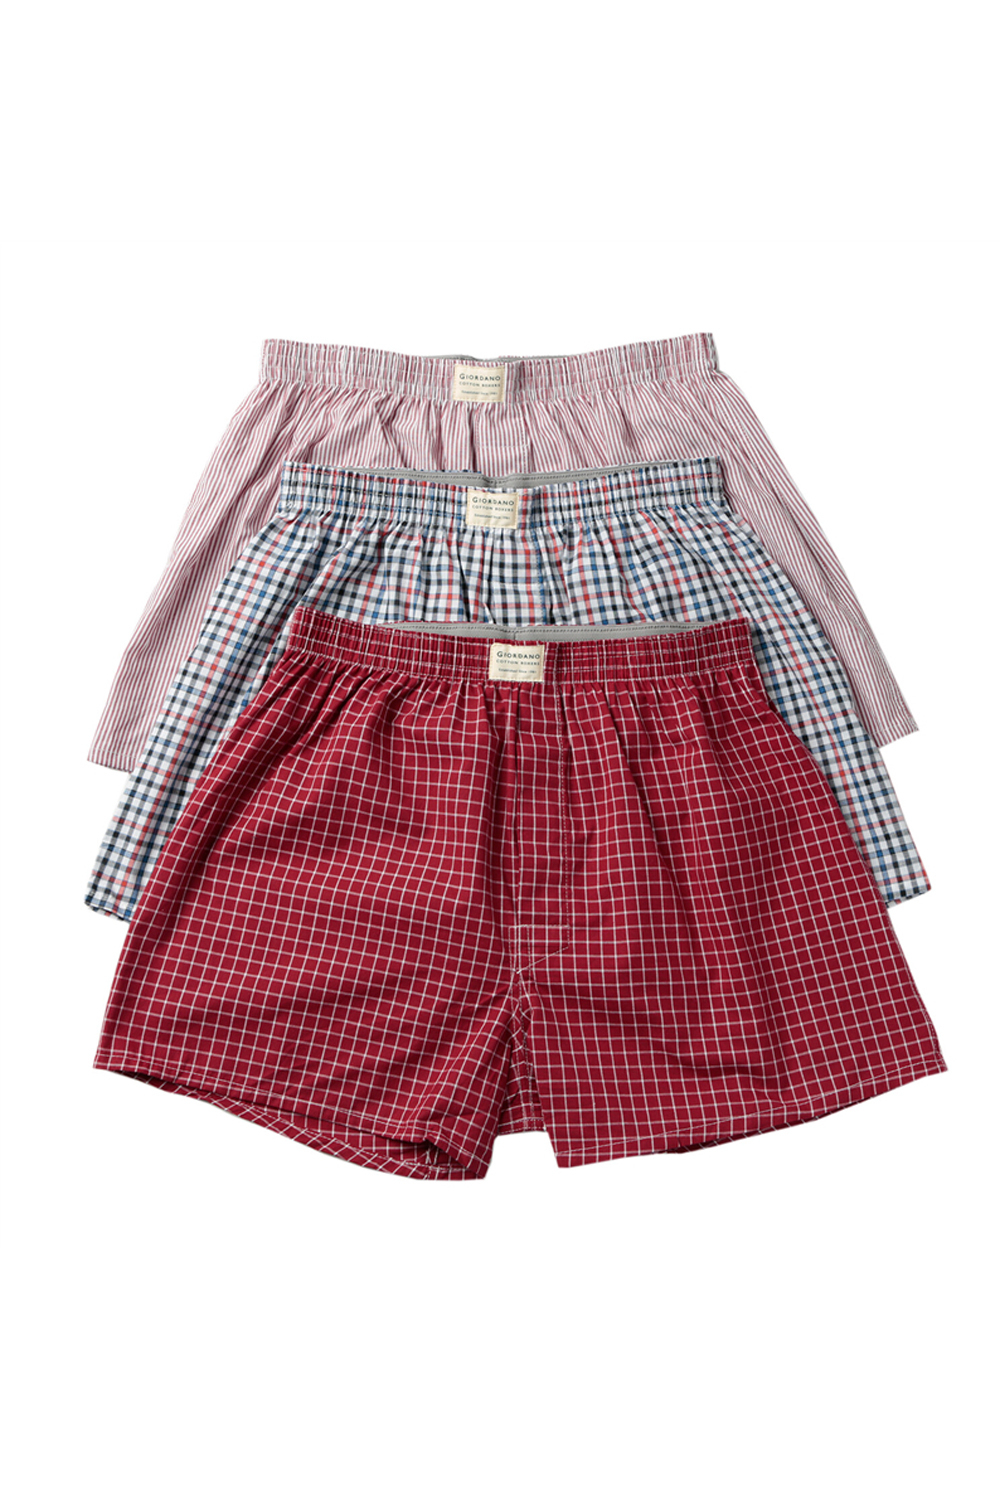 Giordano Red Cotton Boxer Shorts | Odel.lk